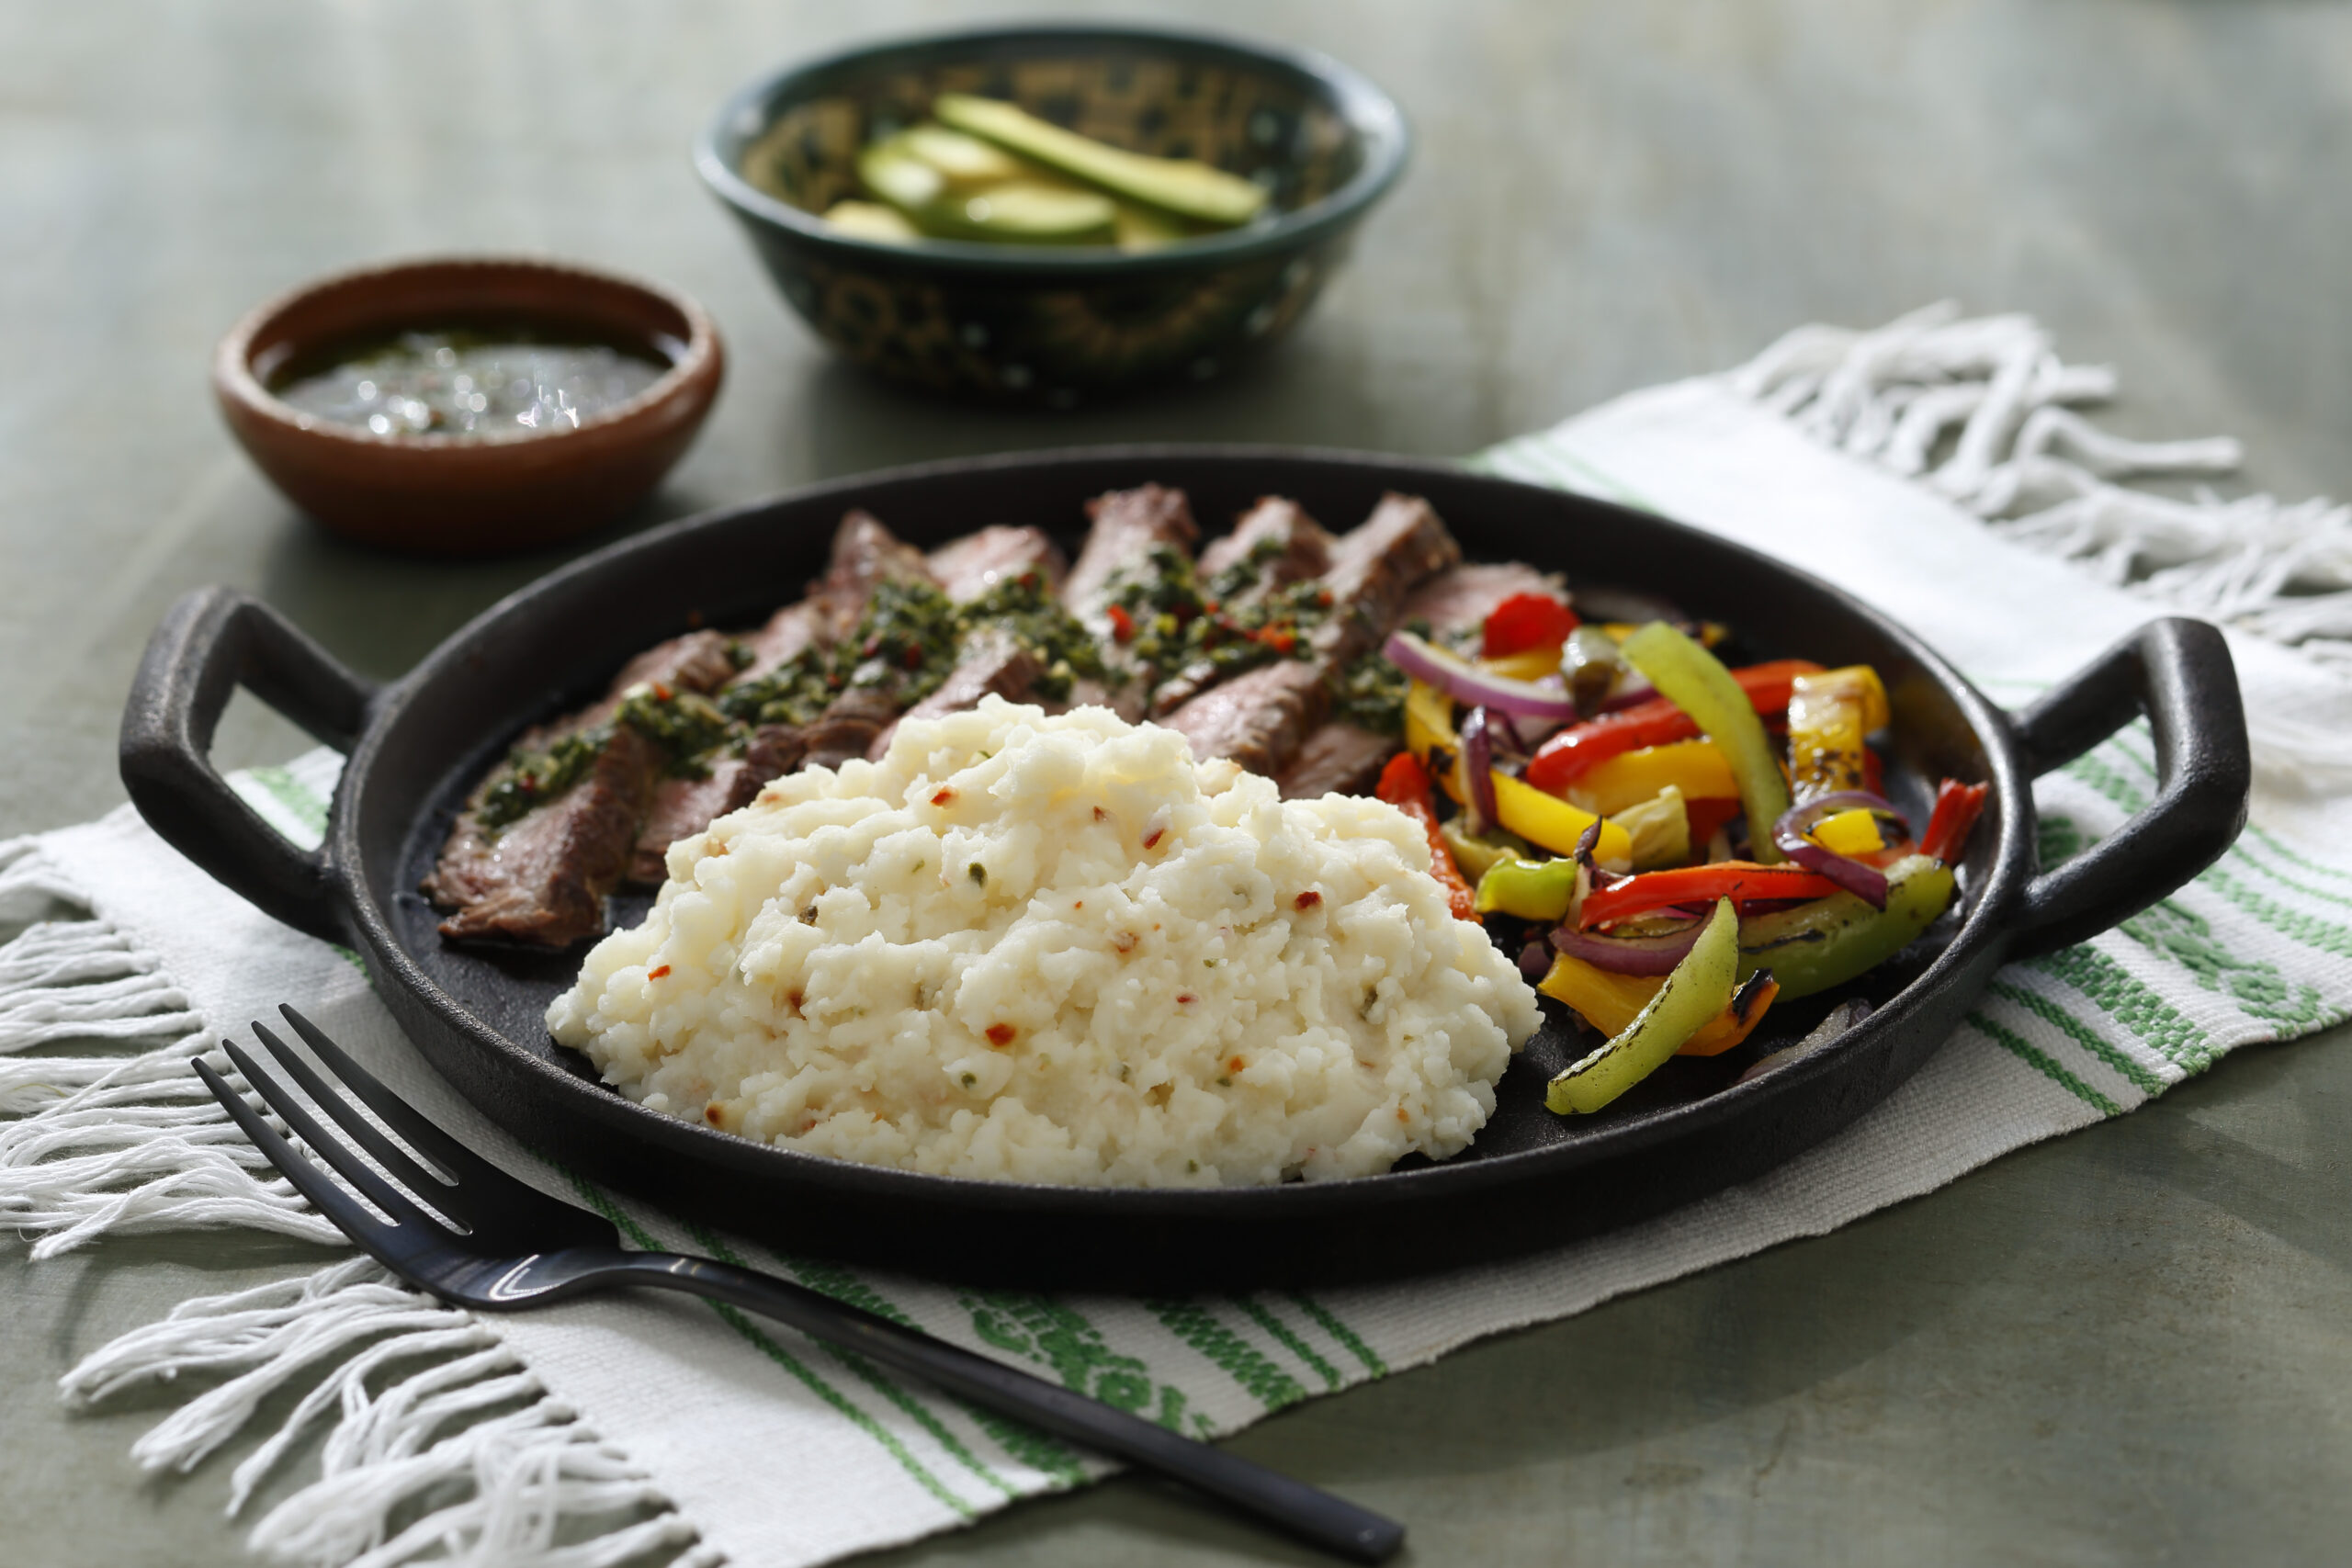 Regional cheeses give an on-trend twist to Idahoan Foods' new mashed potato line